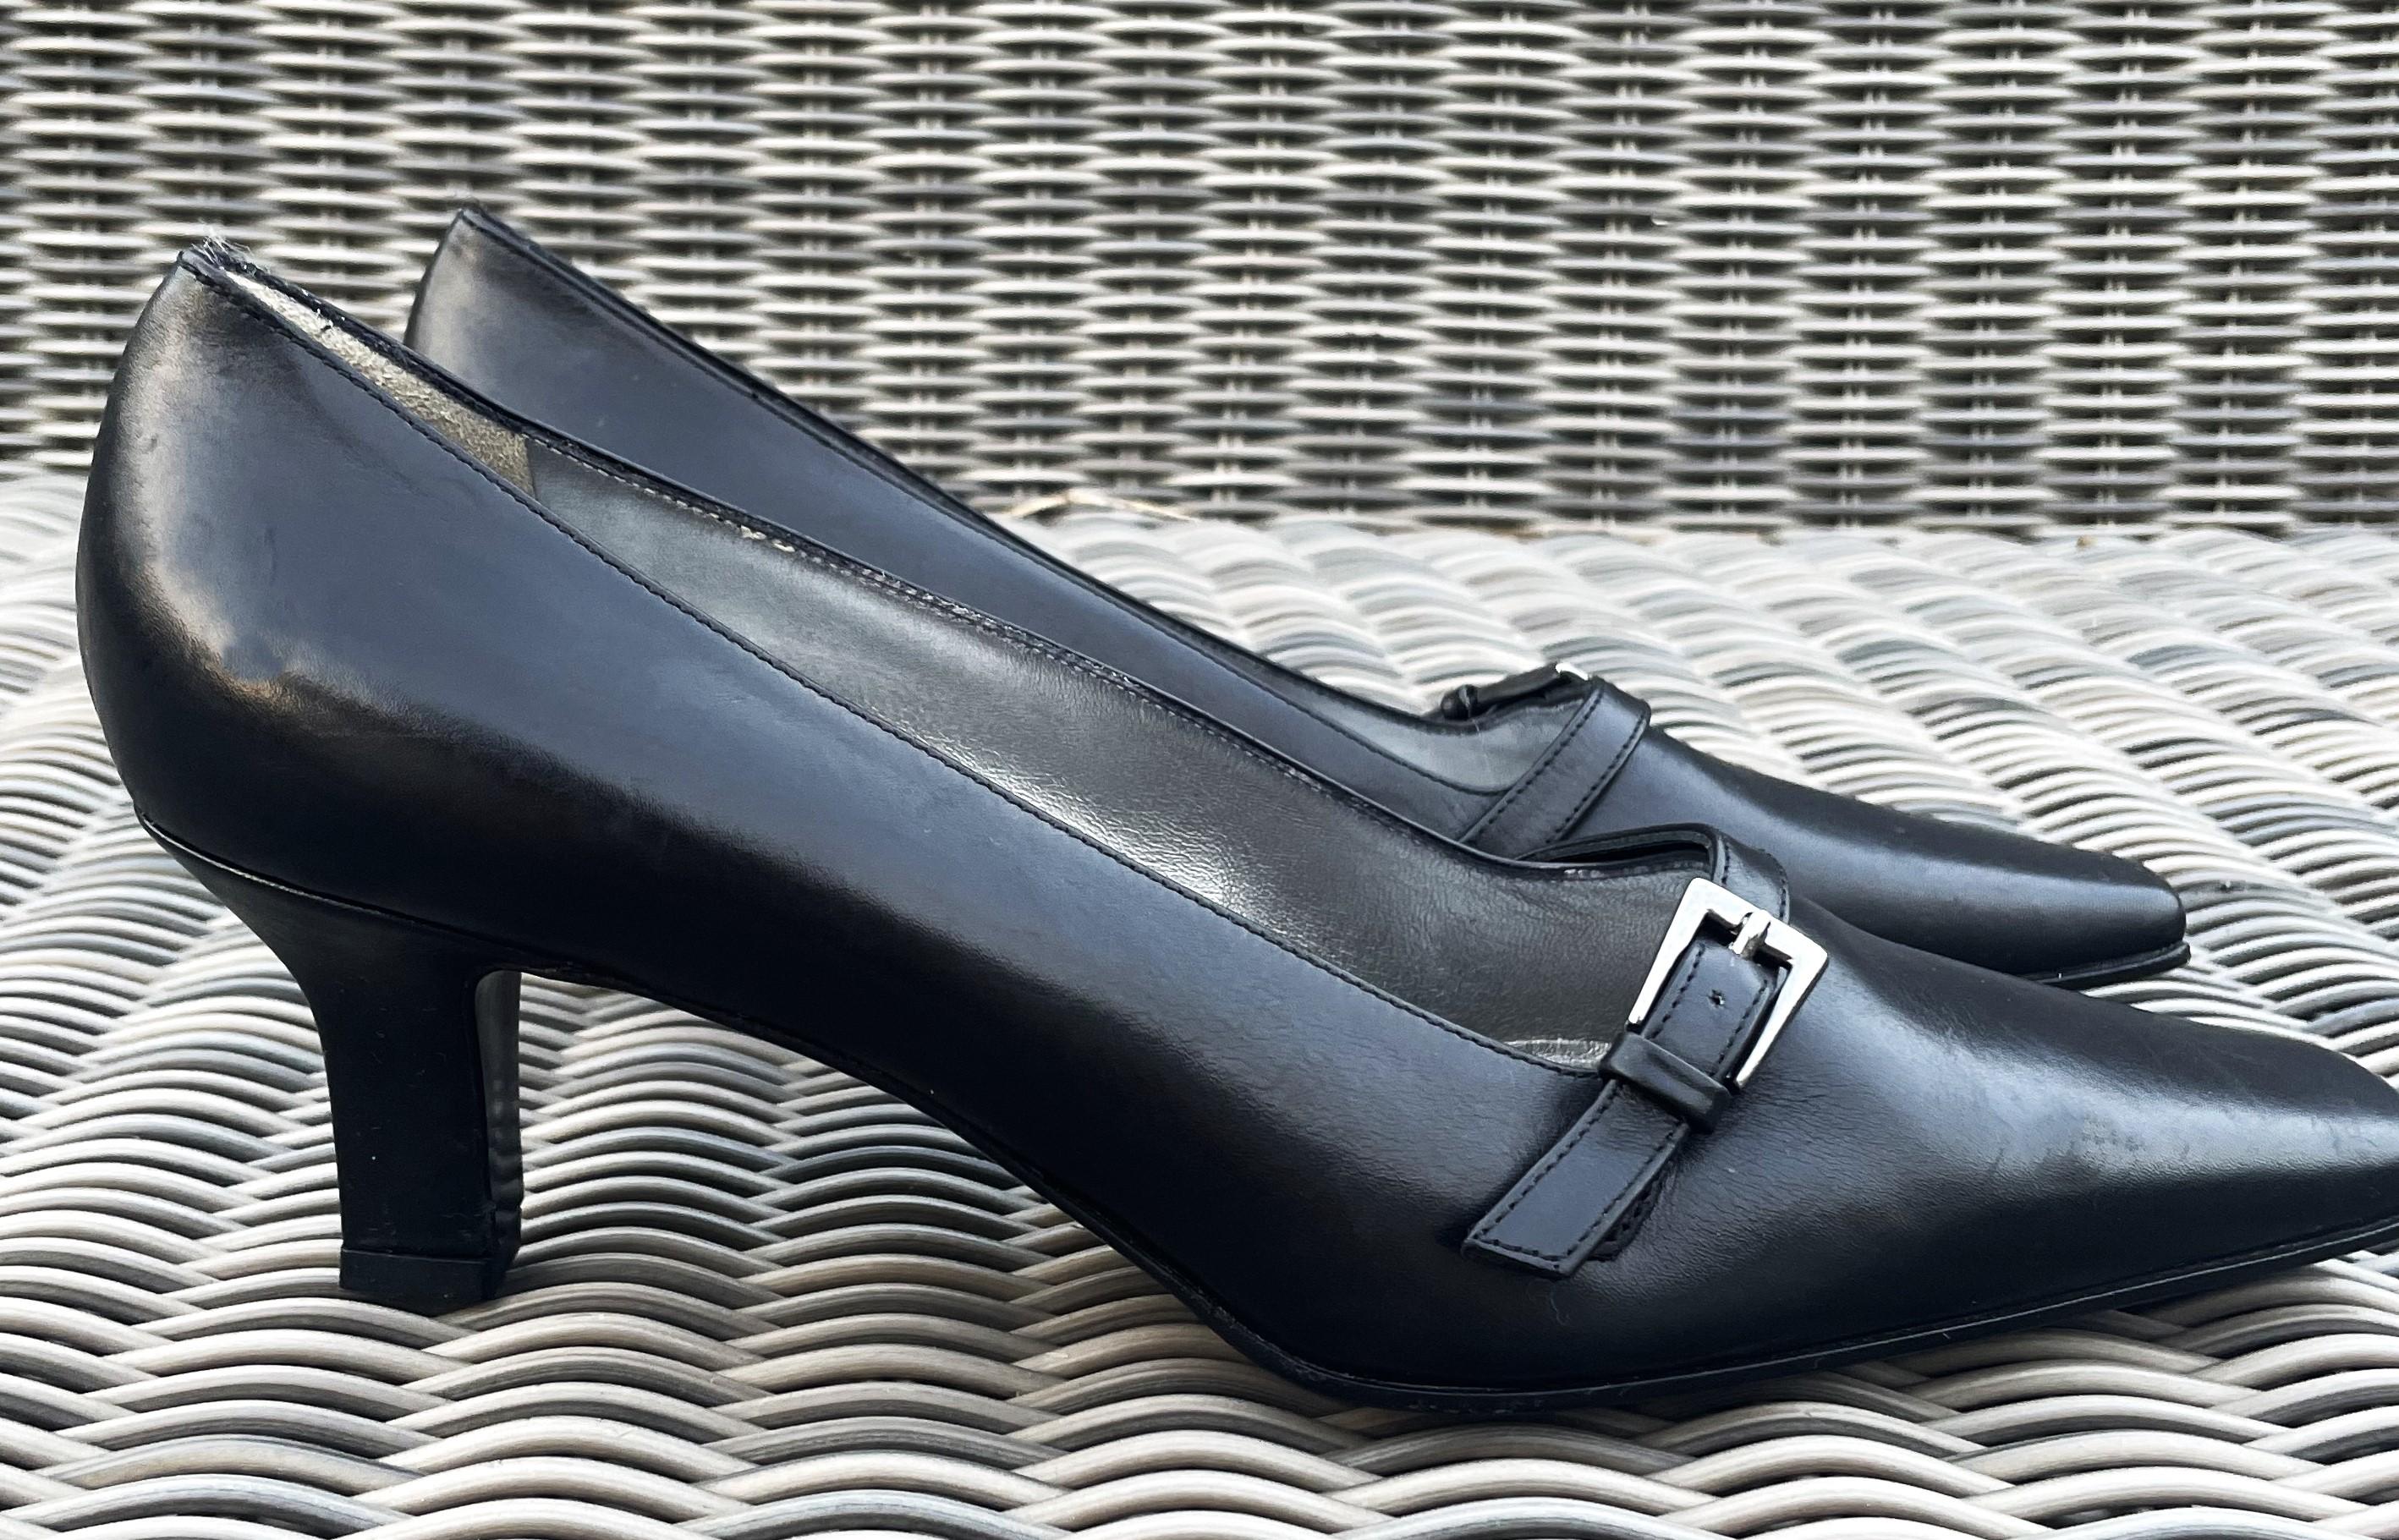 We love these stunning one-of-a kind classy black Escada pumps are timeless and versatile and versatile choice for pumps that can easily complement various outfits. In very good condition like new, because they were worn at a Escada show ones. Made